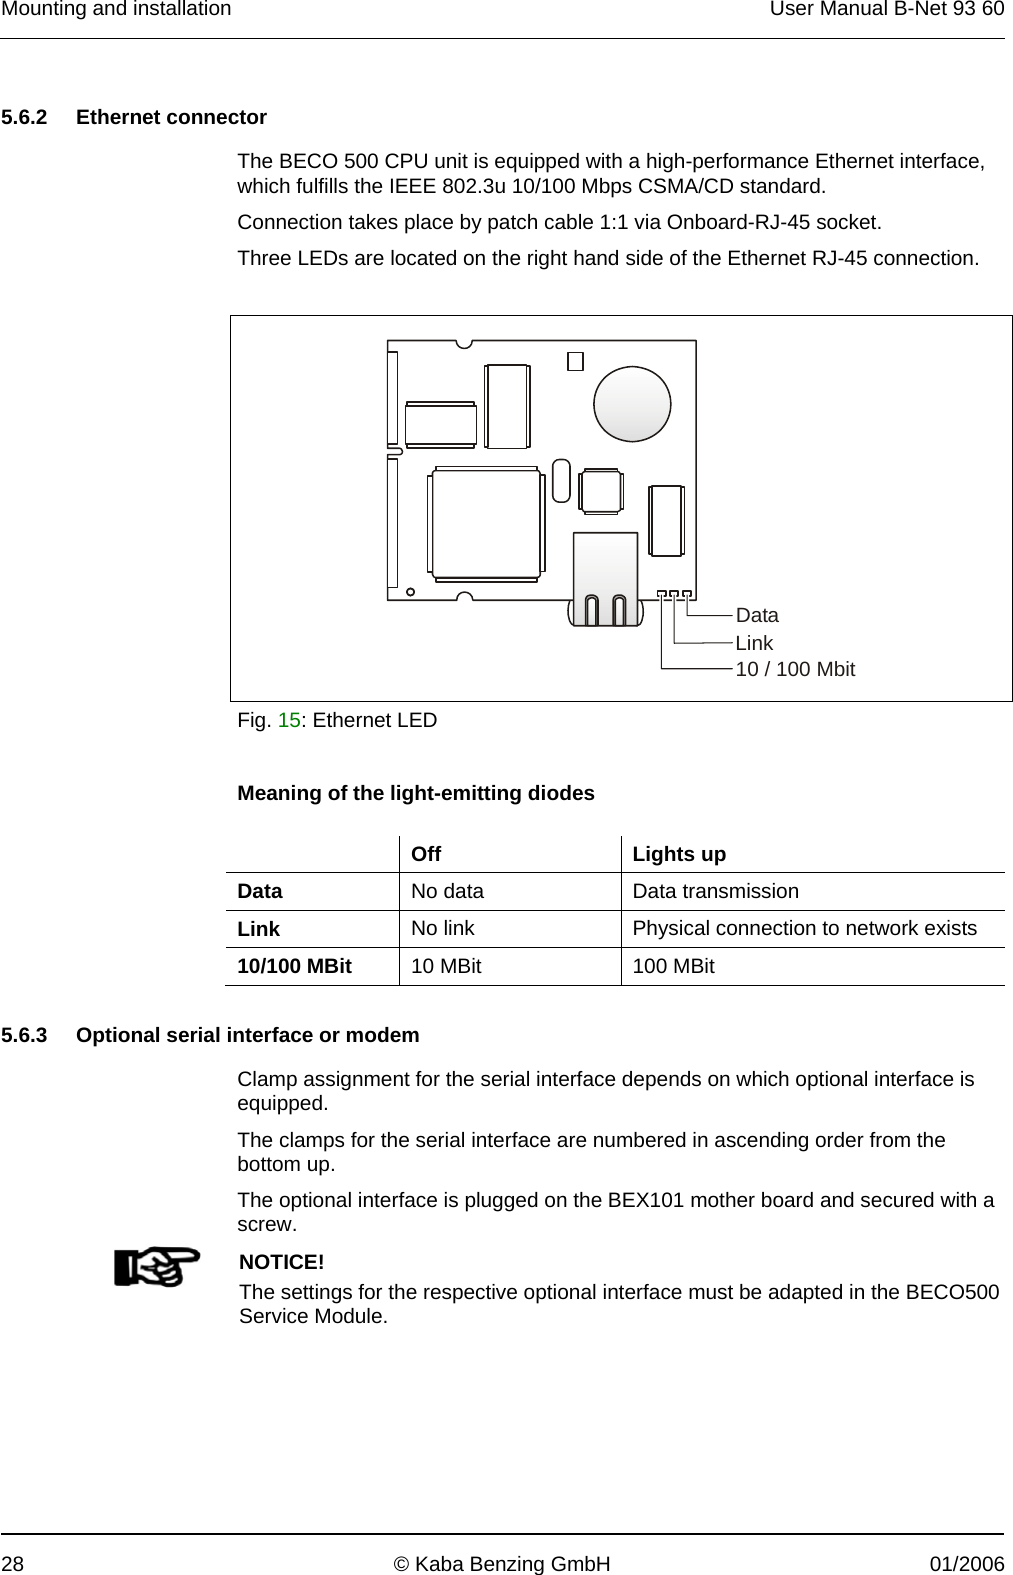 Mounting and installation  User Manual B-Net 93 60 28  © Kaba Benzing GmbH  01/2006   5.6.2 Ethernet connector  The BECO 500 CPU unit is equipped with a high-performance Ethernet interface, which fulfills the IEEE 802.3u 10/100 Mbps CSMA/CD standard. Connection takes place by patch cable 1:1 via Onboard-RJ-45 socket. Three LEDs are located on the right hand side of the Ethernet RJ-45 connection.   DataLink10 / 100 Mbit Fig. 15: Ethernet LED  Meaning of the light-emitting diodes   Off  Lights up Data  No data  Data transmission Link  No link  Physical connection to network exists 10/100 MBit  10 MBit  100 MBit   5.6.3  Optional serial interface or modem  Clamp assignment for the serial interface depends on which optional interface is equipped. The clamps for the serial interface are numbered in ascending order from the bottom up. The optional interface is plugged on the BEX101 mother board and secured with a screw.   NOTICE! The settings for the respective optional interface must be adapted in the BECO500 Service Module.  